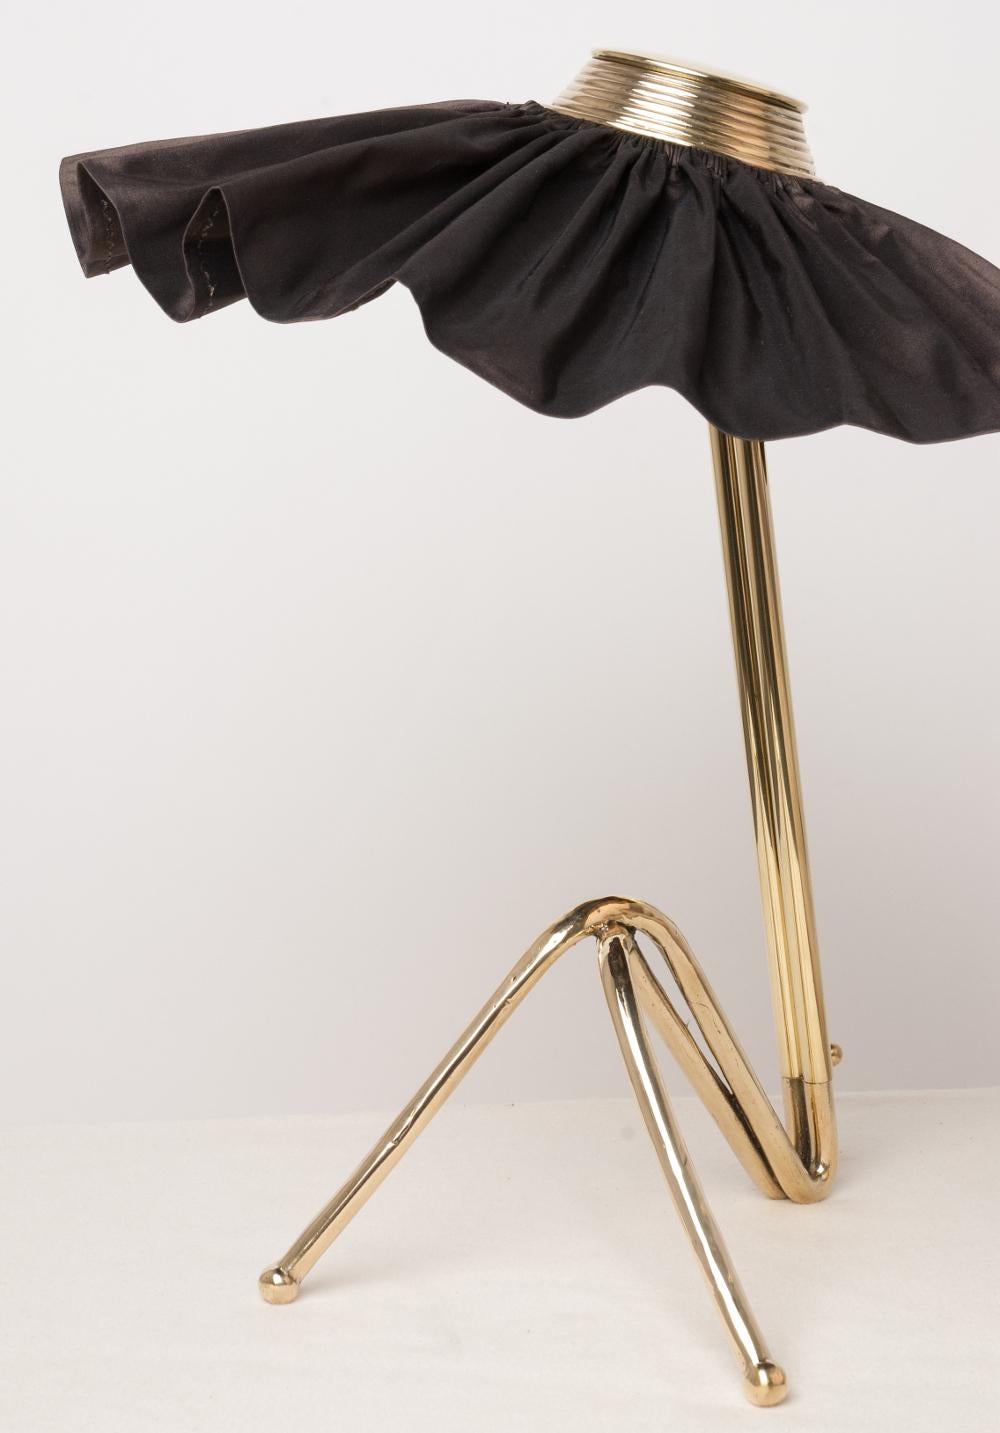 This table lamp is a contemporary piece, made entirely by hand in Tuscany Italy, 100% of Italian origin. 
Ultra-femme desk lighting, lady-like forms creates an elegant silhouette with soft curves; like the overlap of legs and the silk skirt seems to